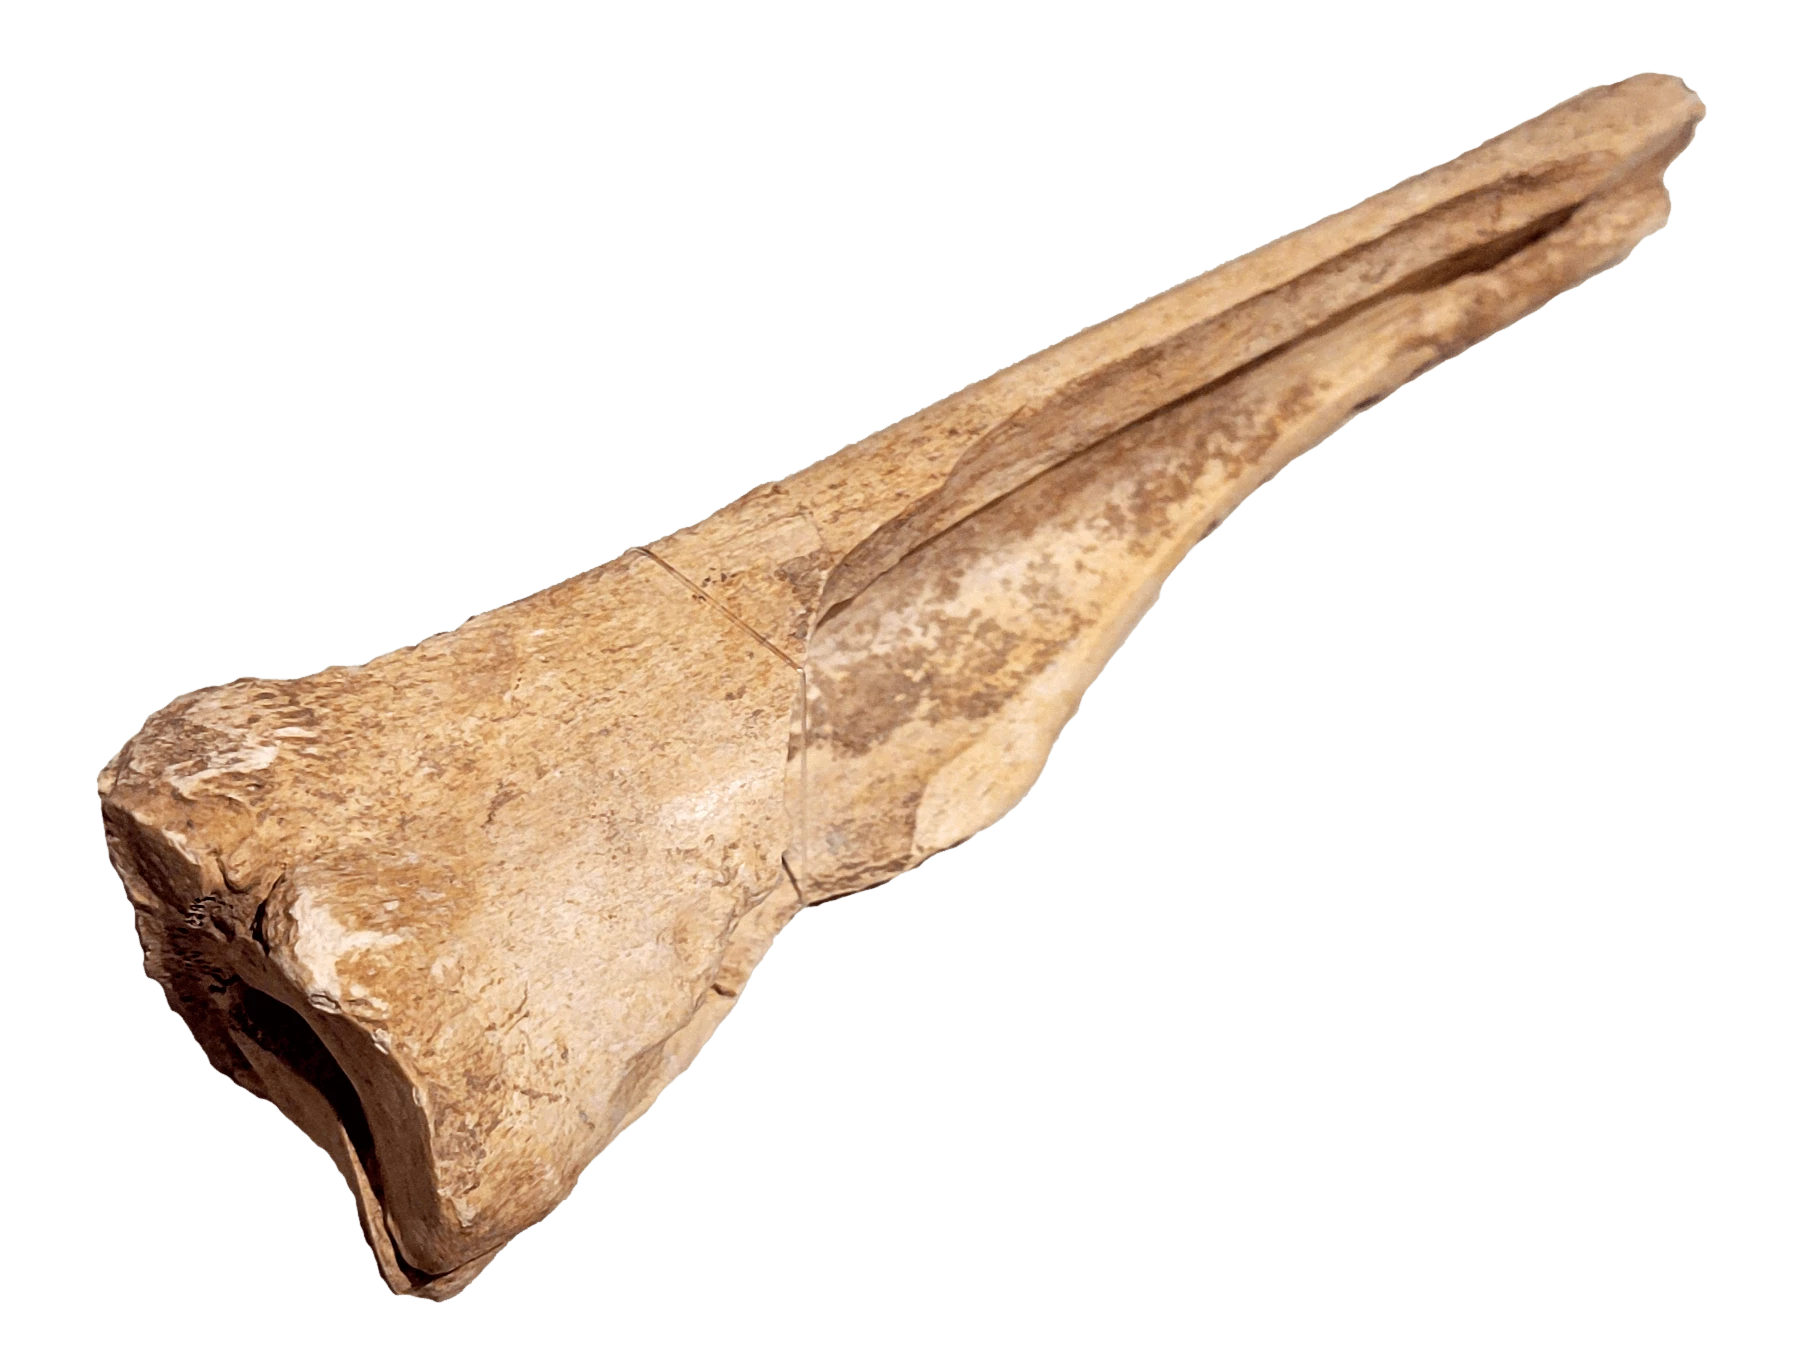 Photo of a bone beamer, which is wide at one end and narrow at the opposite end.